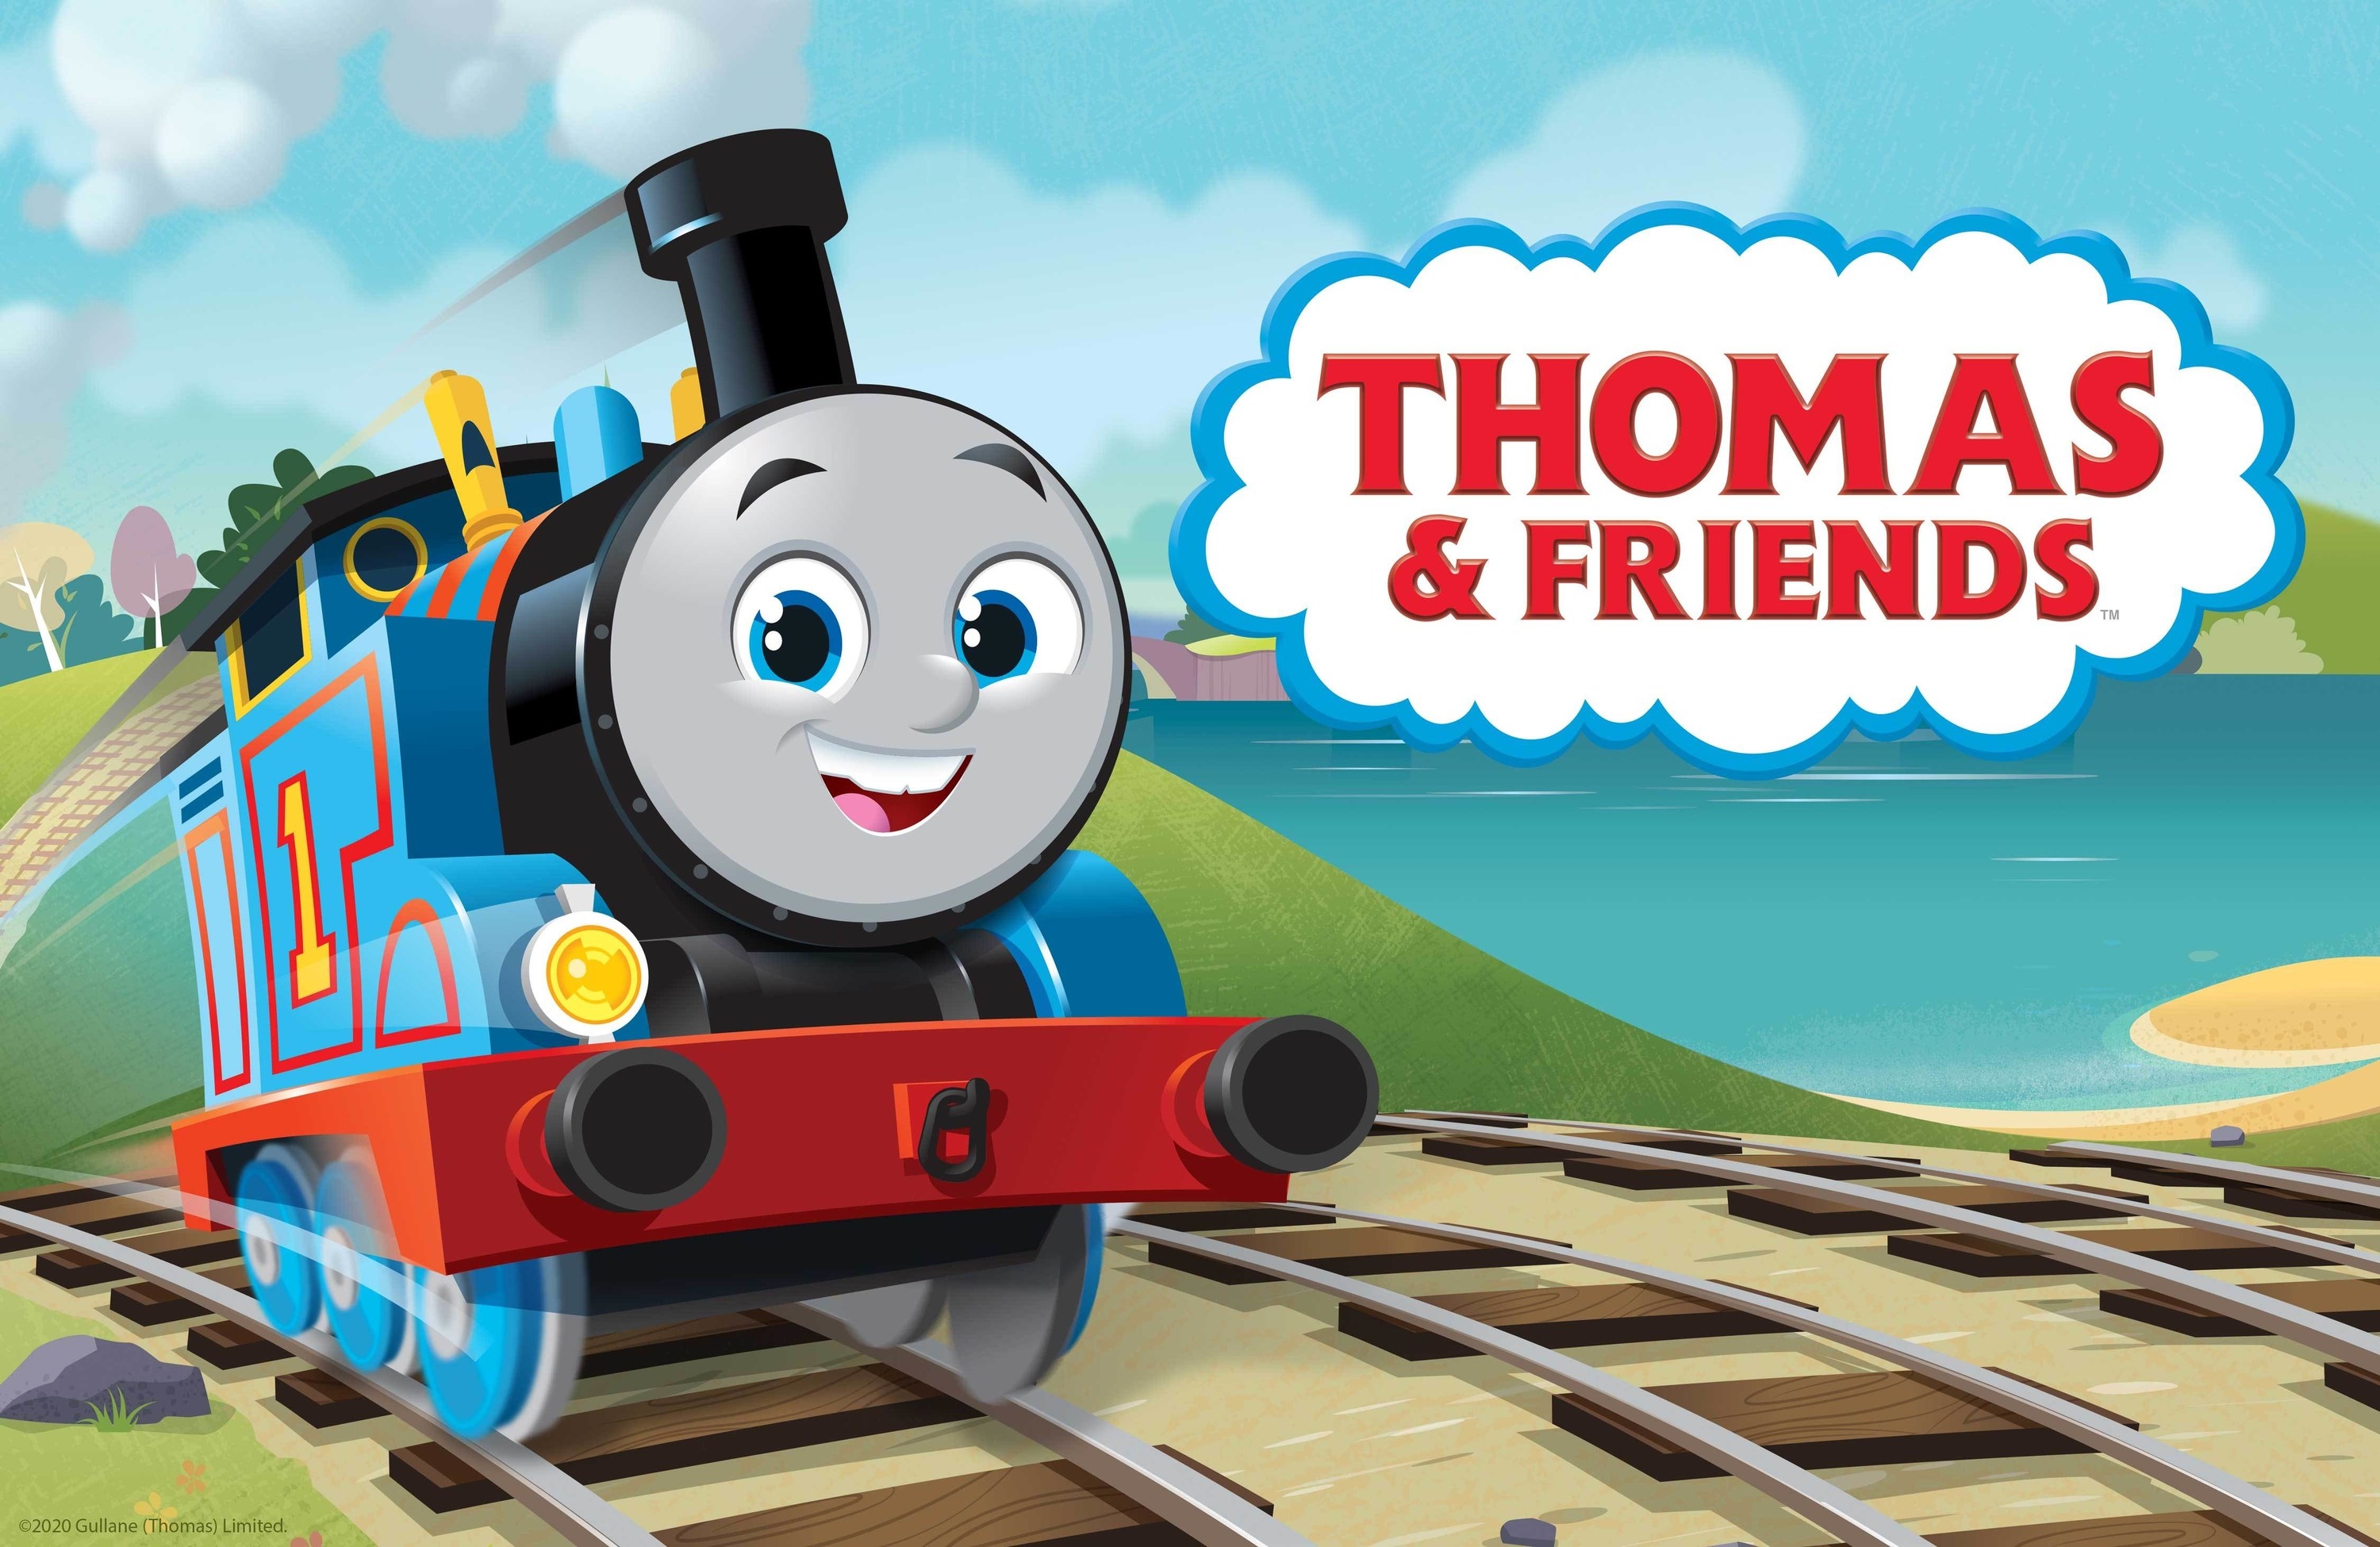 A poster of the show Thomas &amp;amp; Friends with Thomas who is a blue coloured train engine